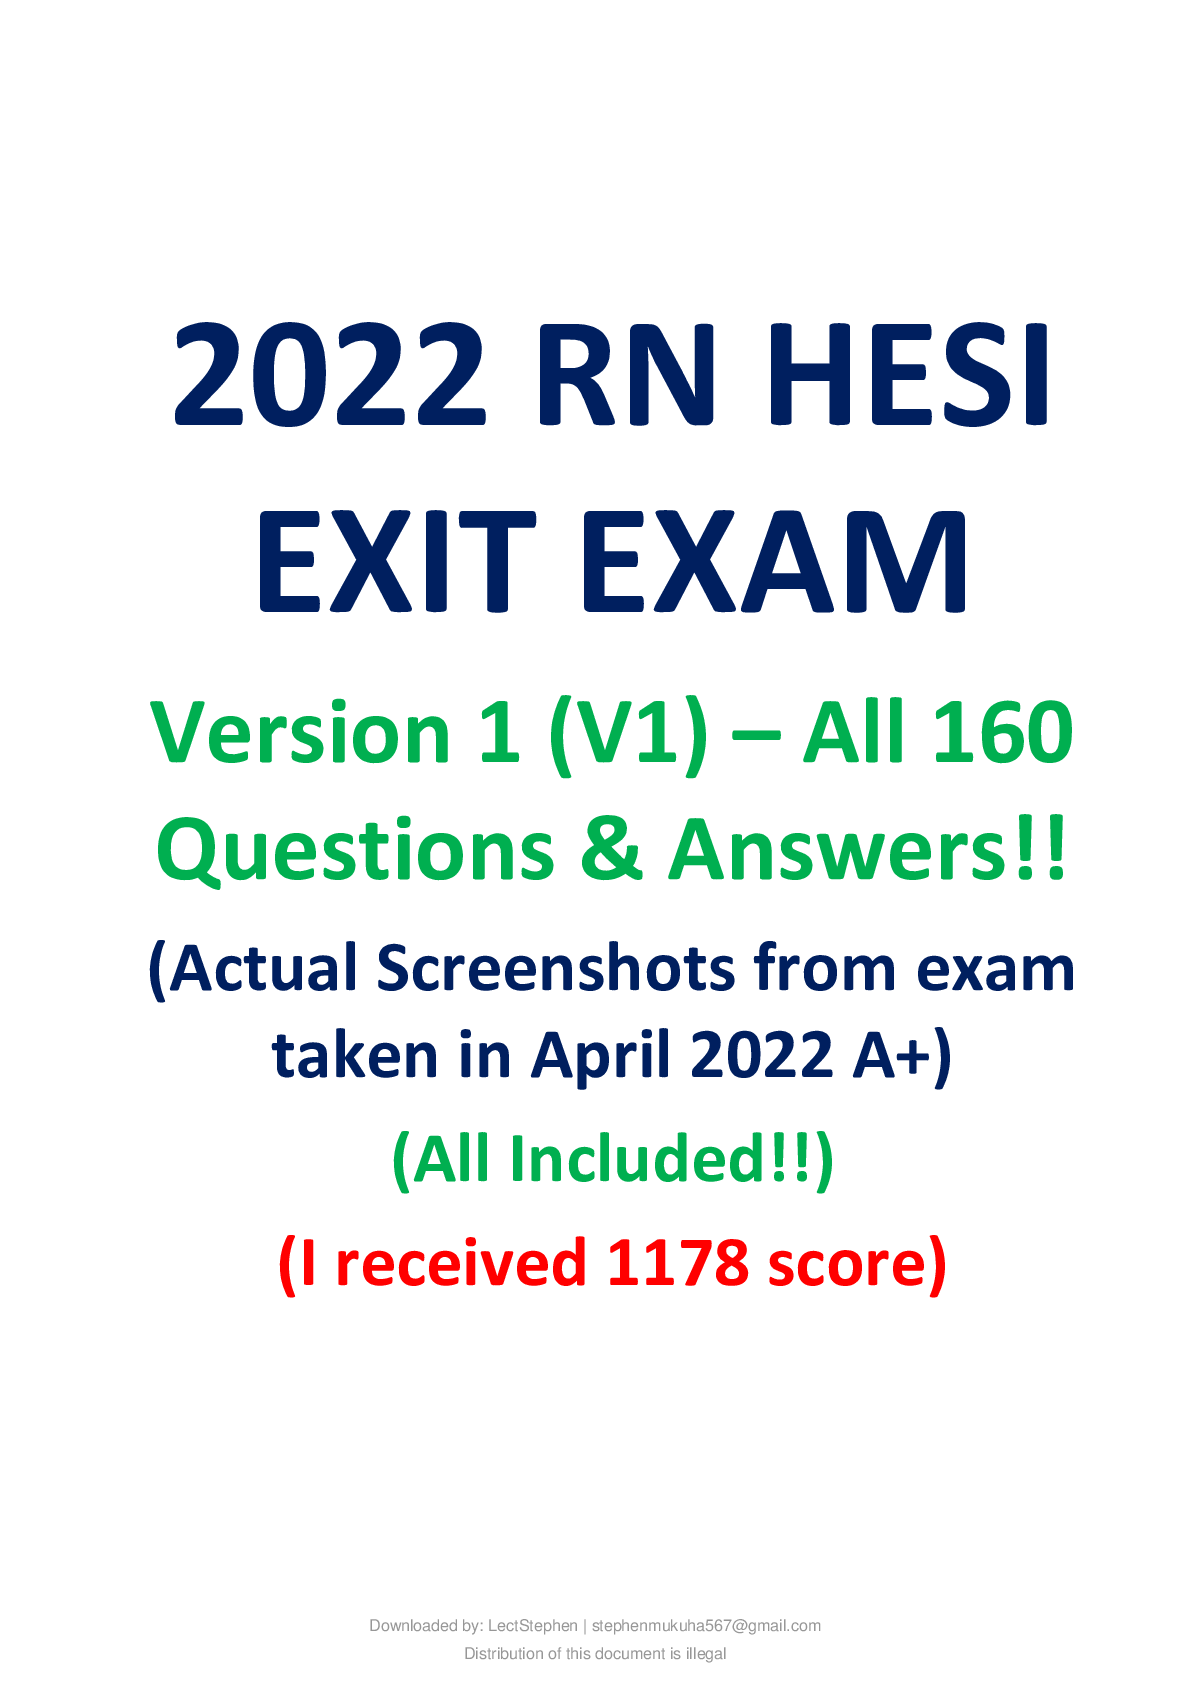 2022 RN HESI EXIT EXAM VERSION 1 V1 ALL 160 Q&A,FROM TAKEN EXAM